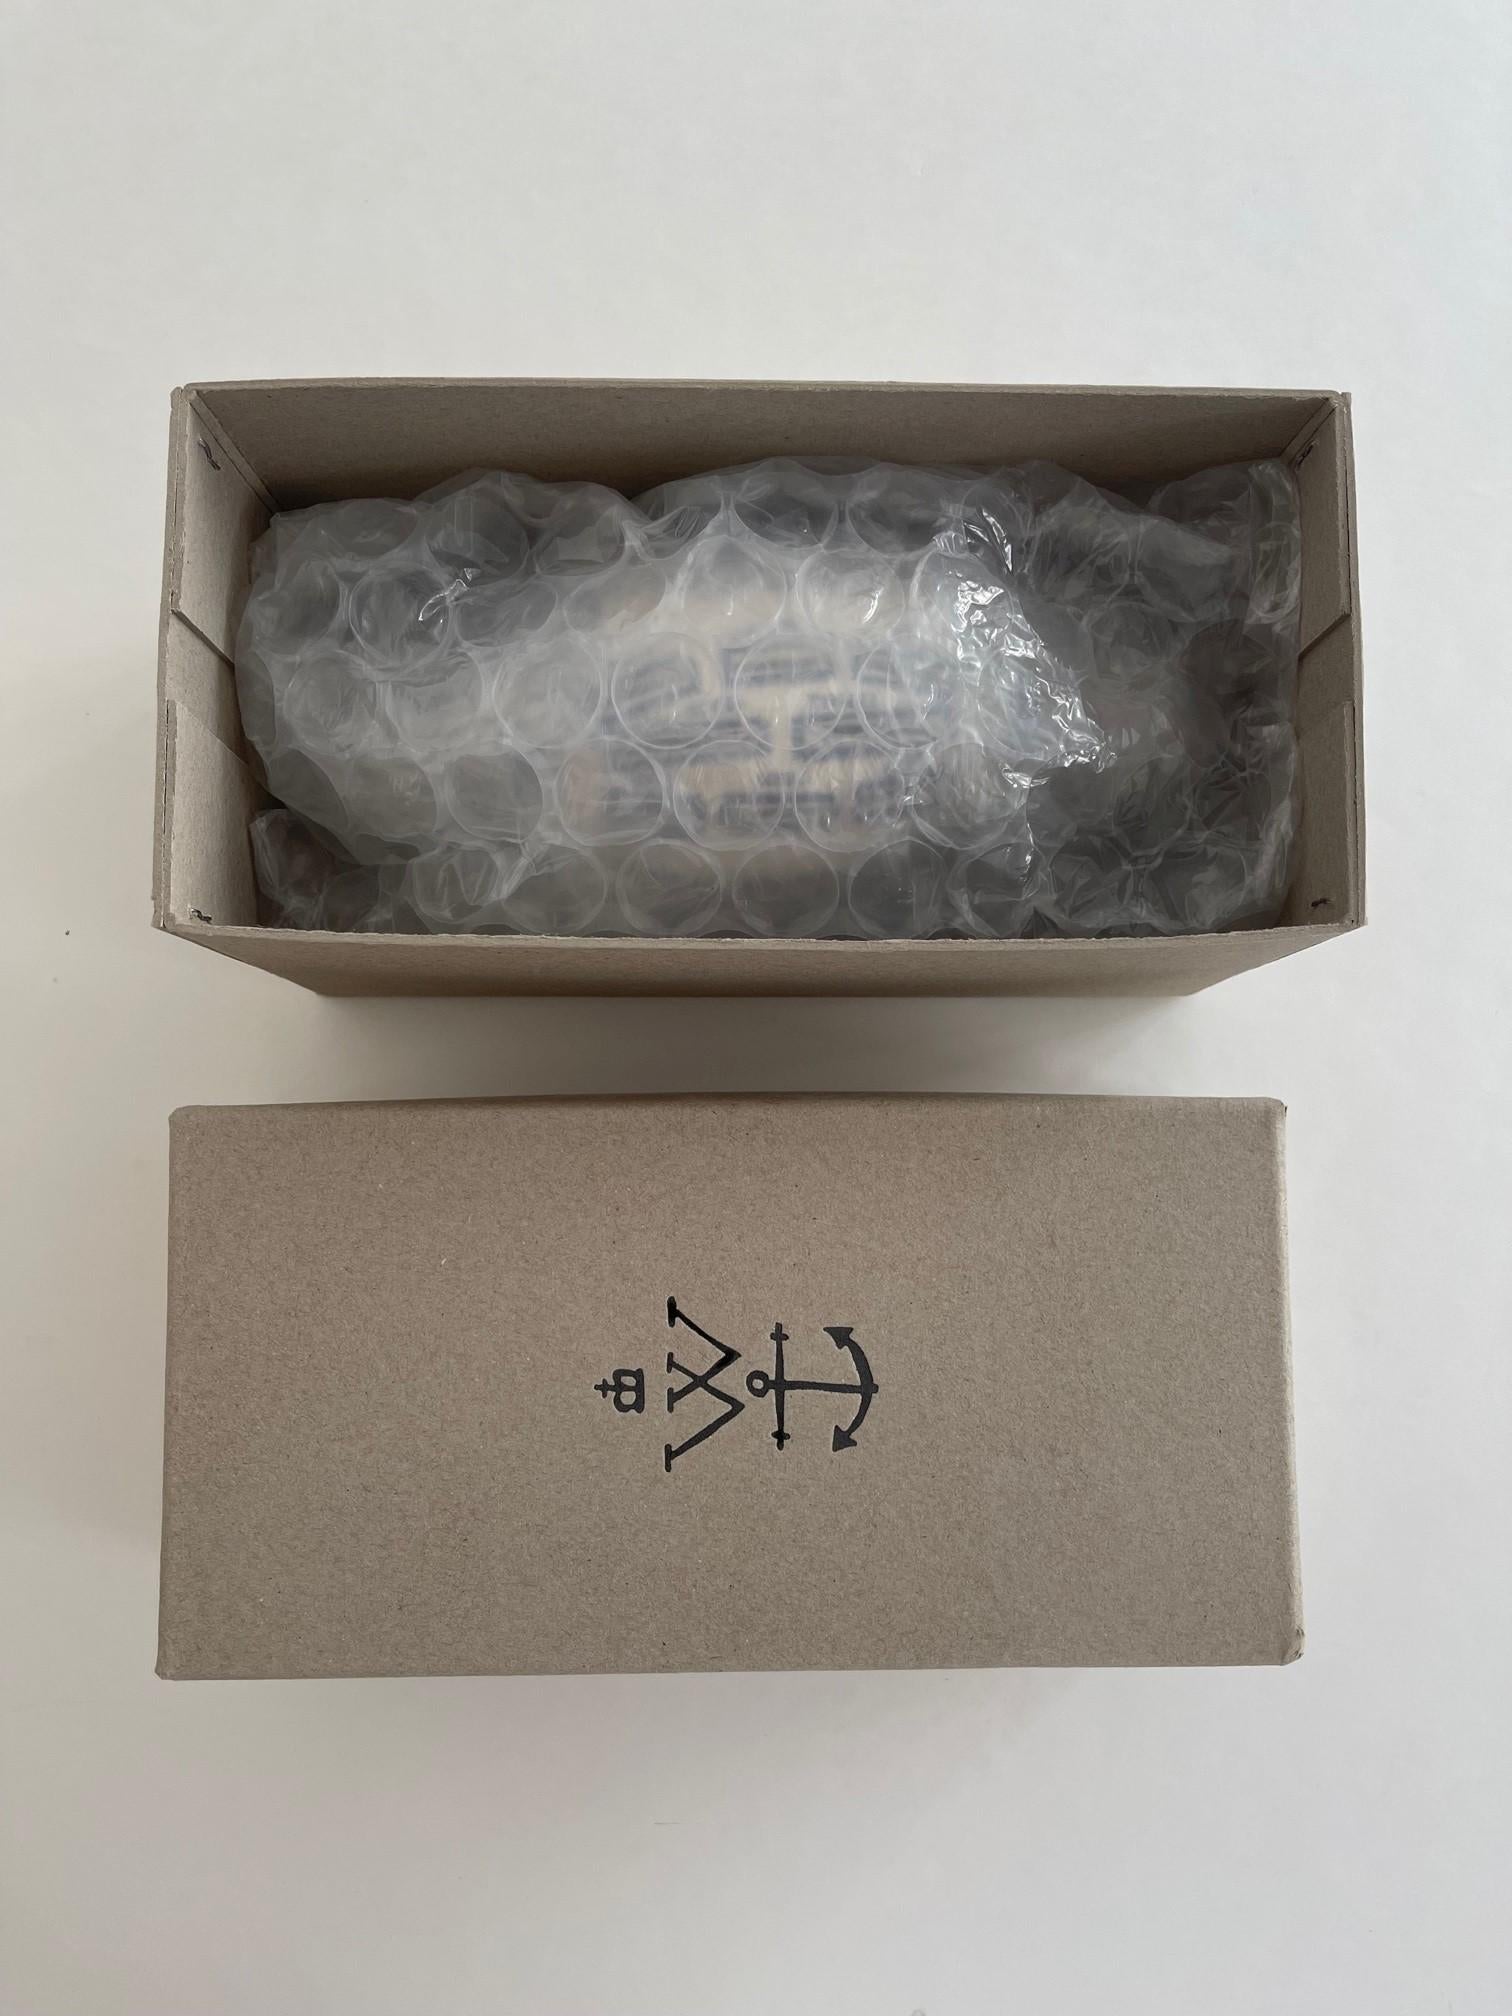 Painted and glazed ceramic multiple with rubber stopper, 2019, with the Artist's logo on the underside, from the edition of unknown size, contained in the original Serpentine Gallery box.